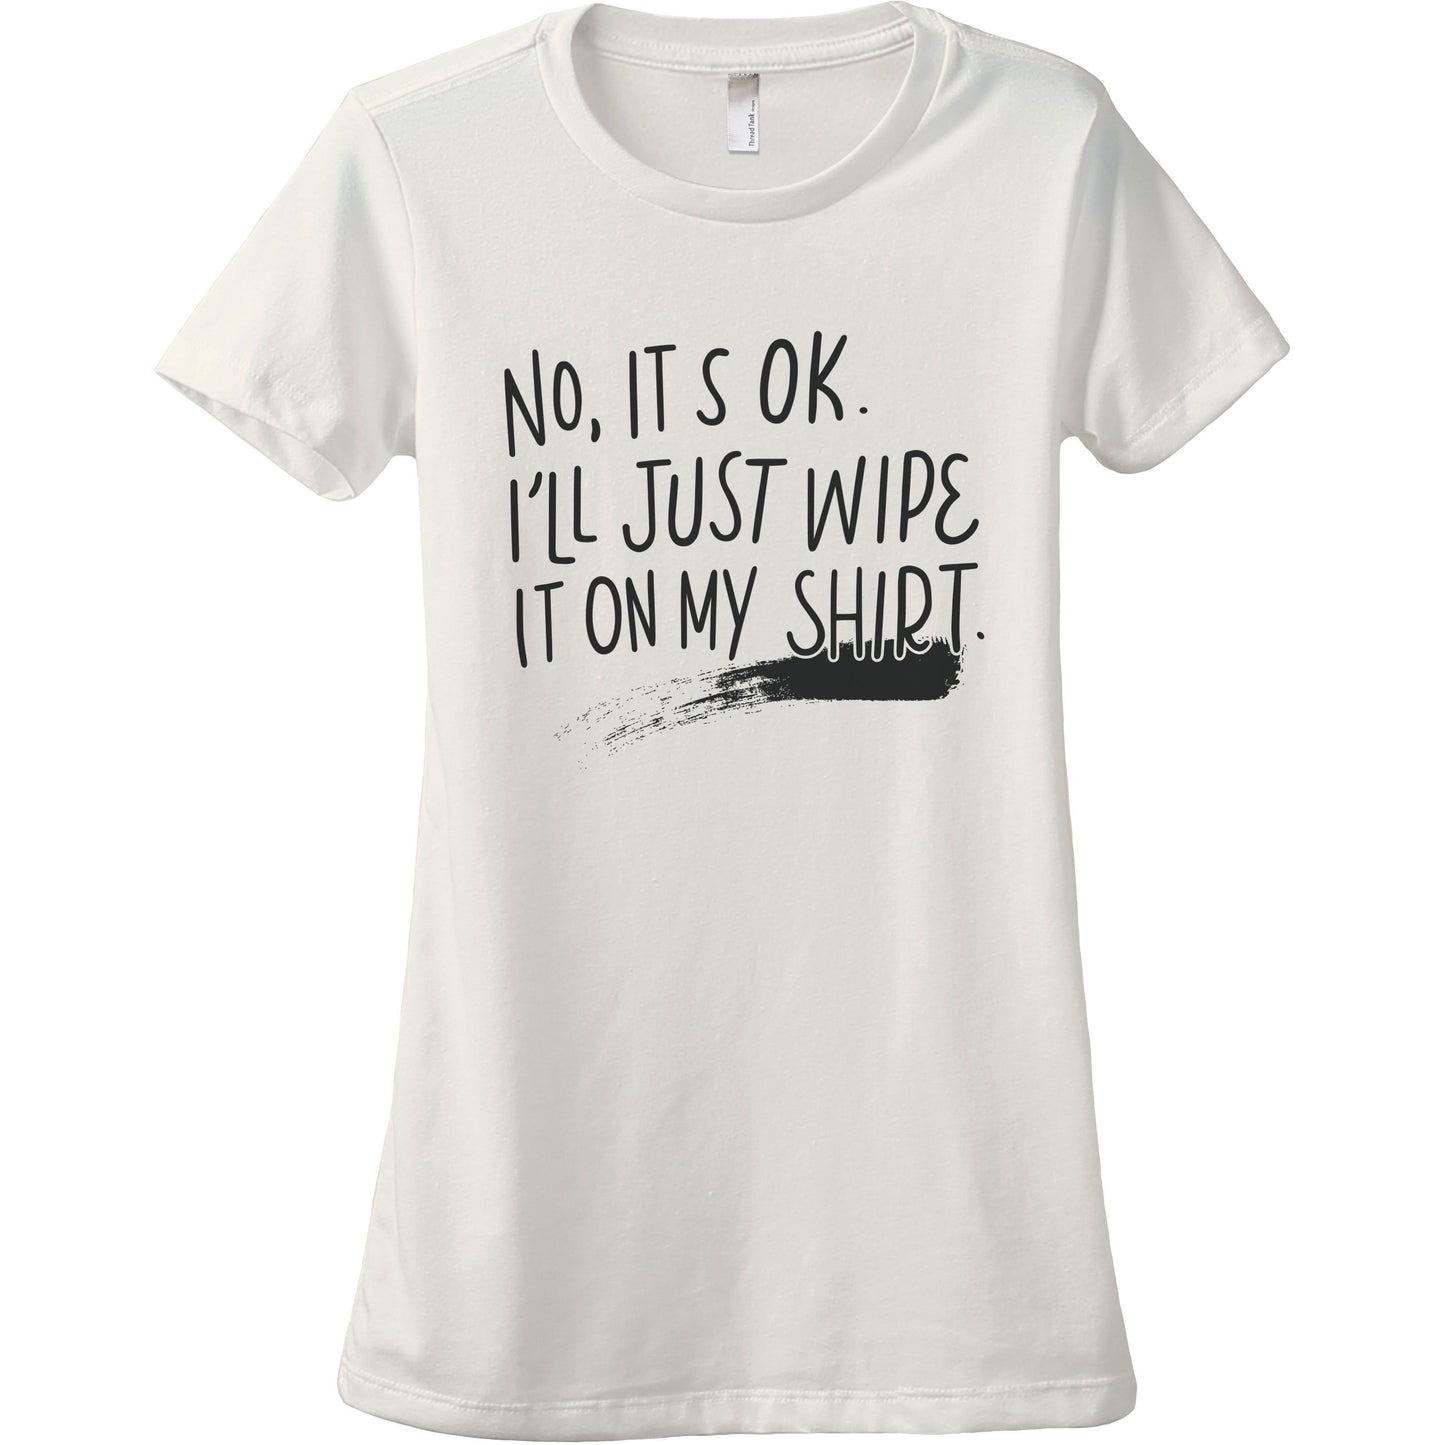 I'll Just Wipe It On My Shirt - Stories You Can Wear by Thread Tank